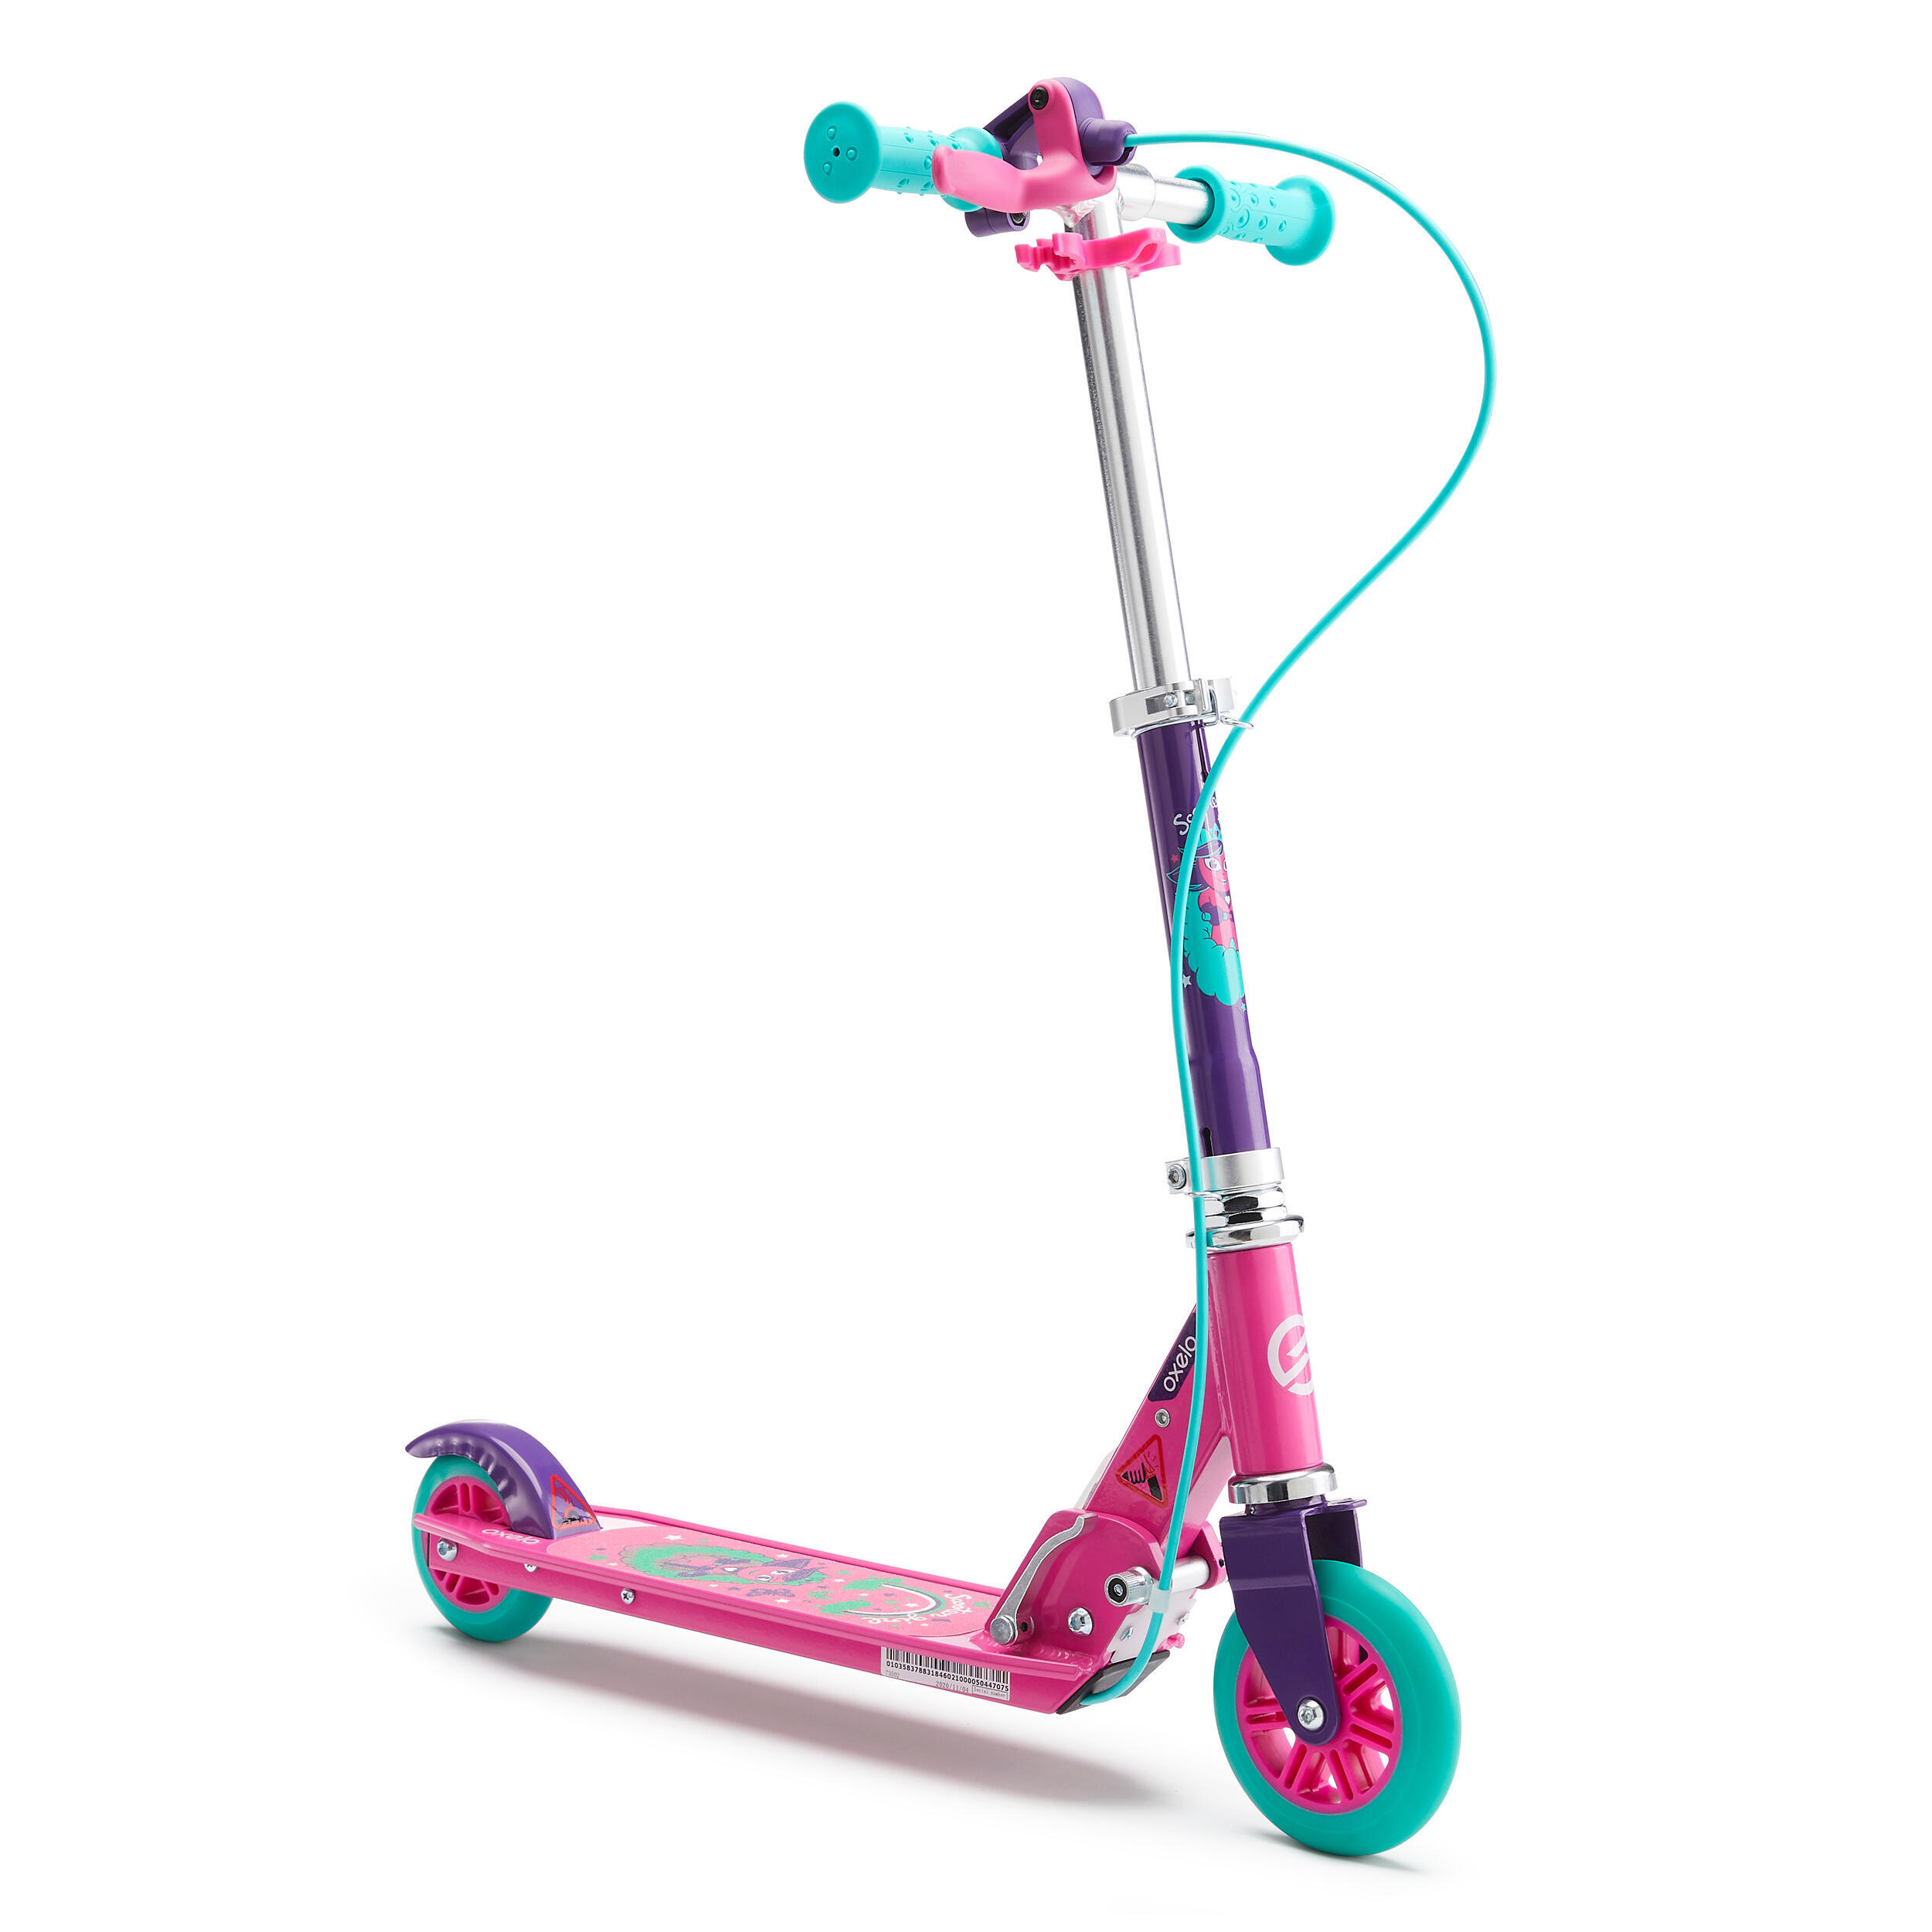 OXELO Play 5 Children's Scooter with Brake - Purple